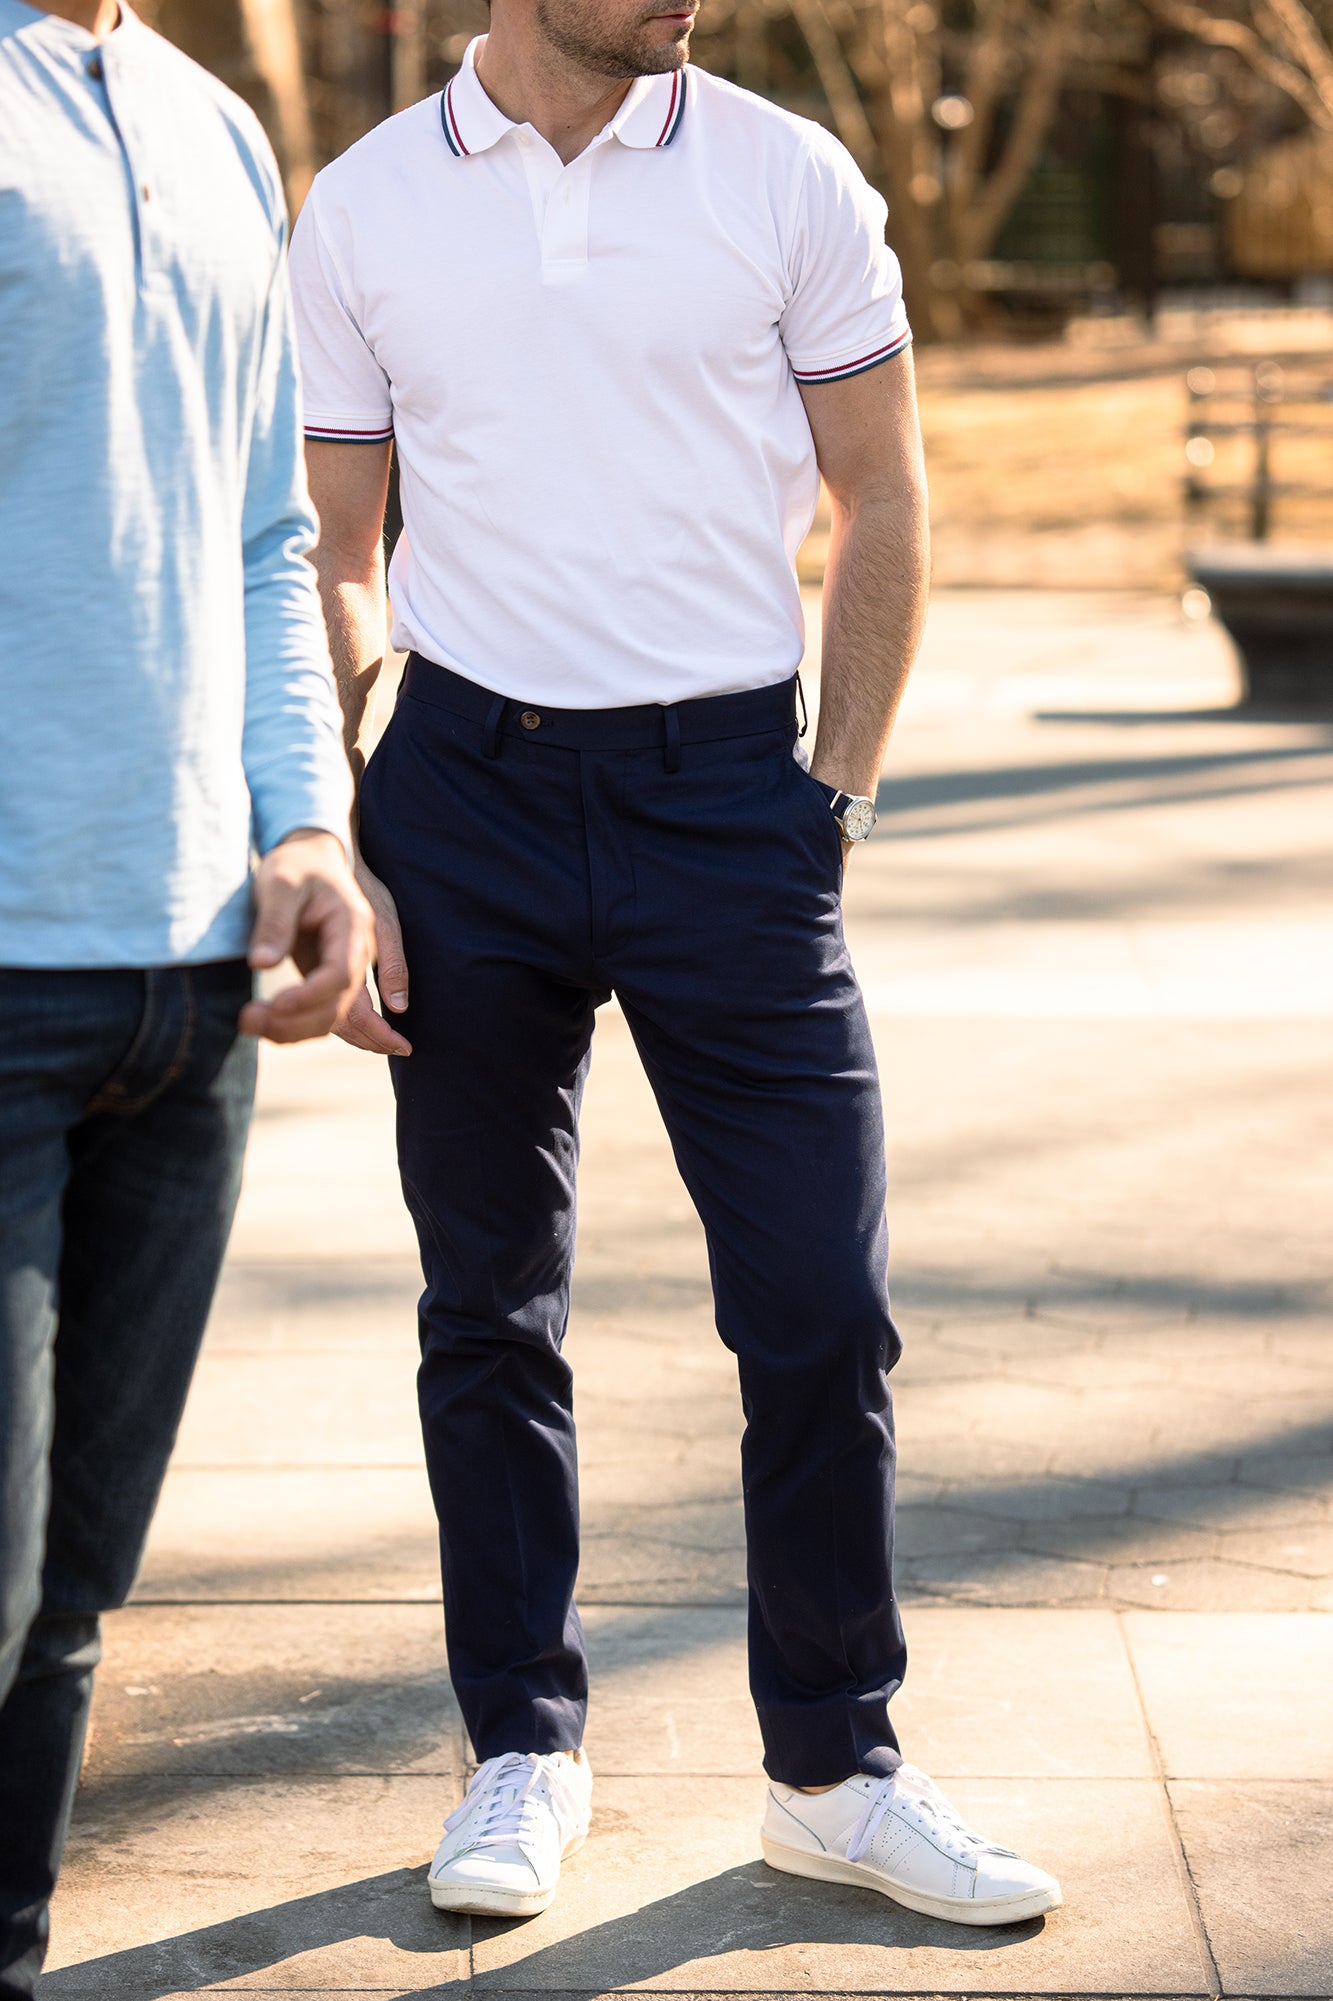 Formal shirts and pants combination with navy blue pant | Blue pants men, Navy  blue pants mens, Navy blue chinos men